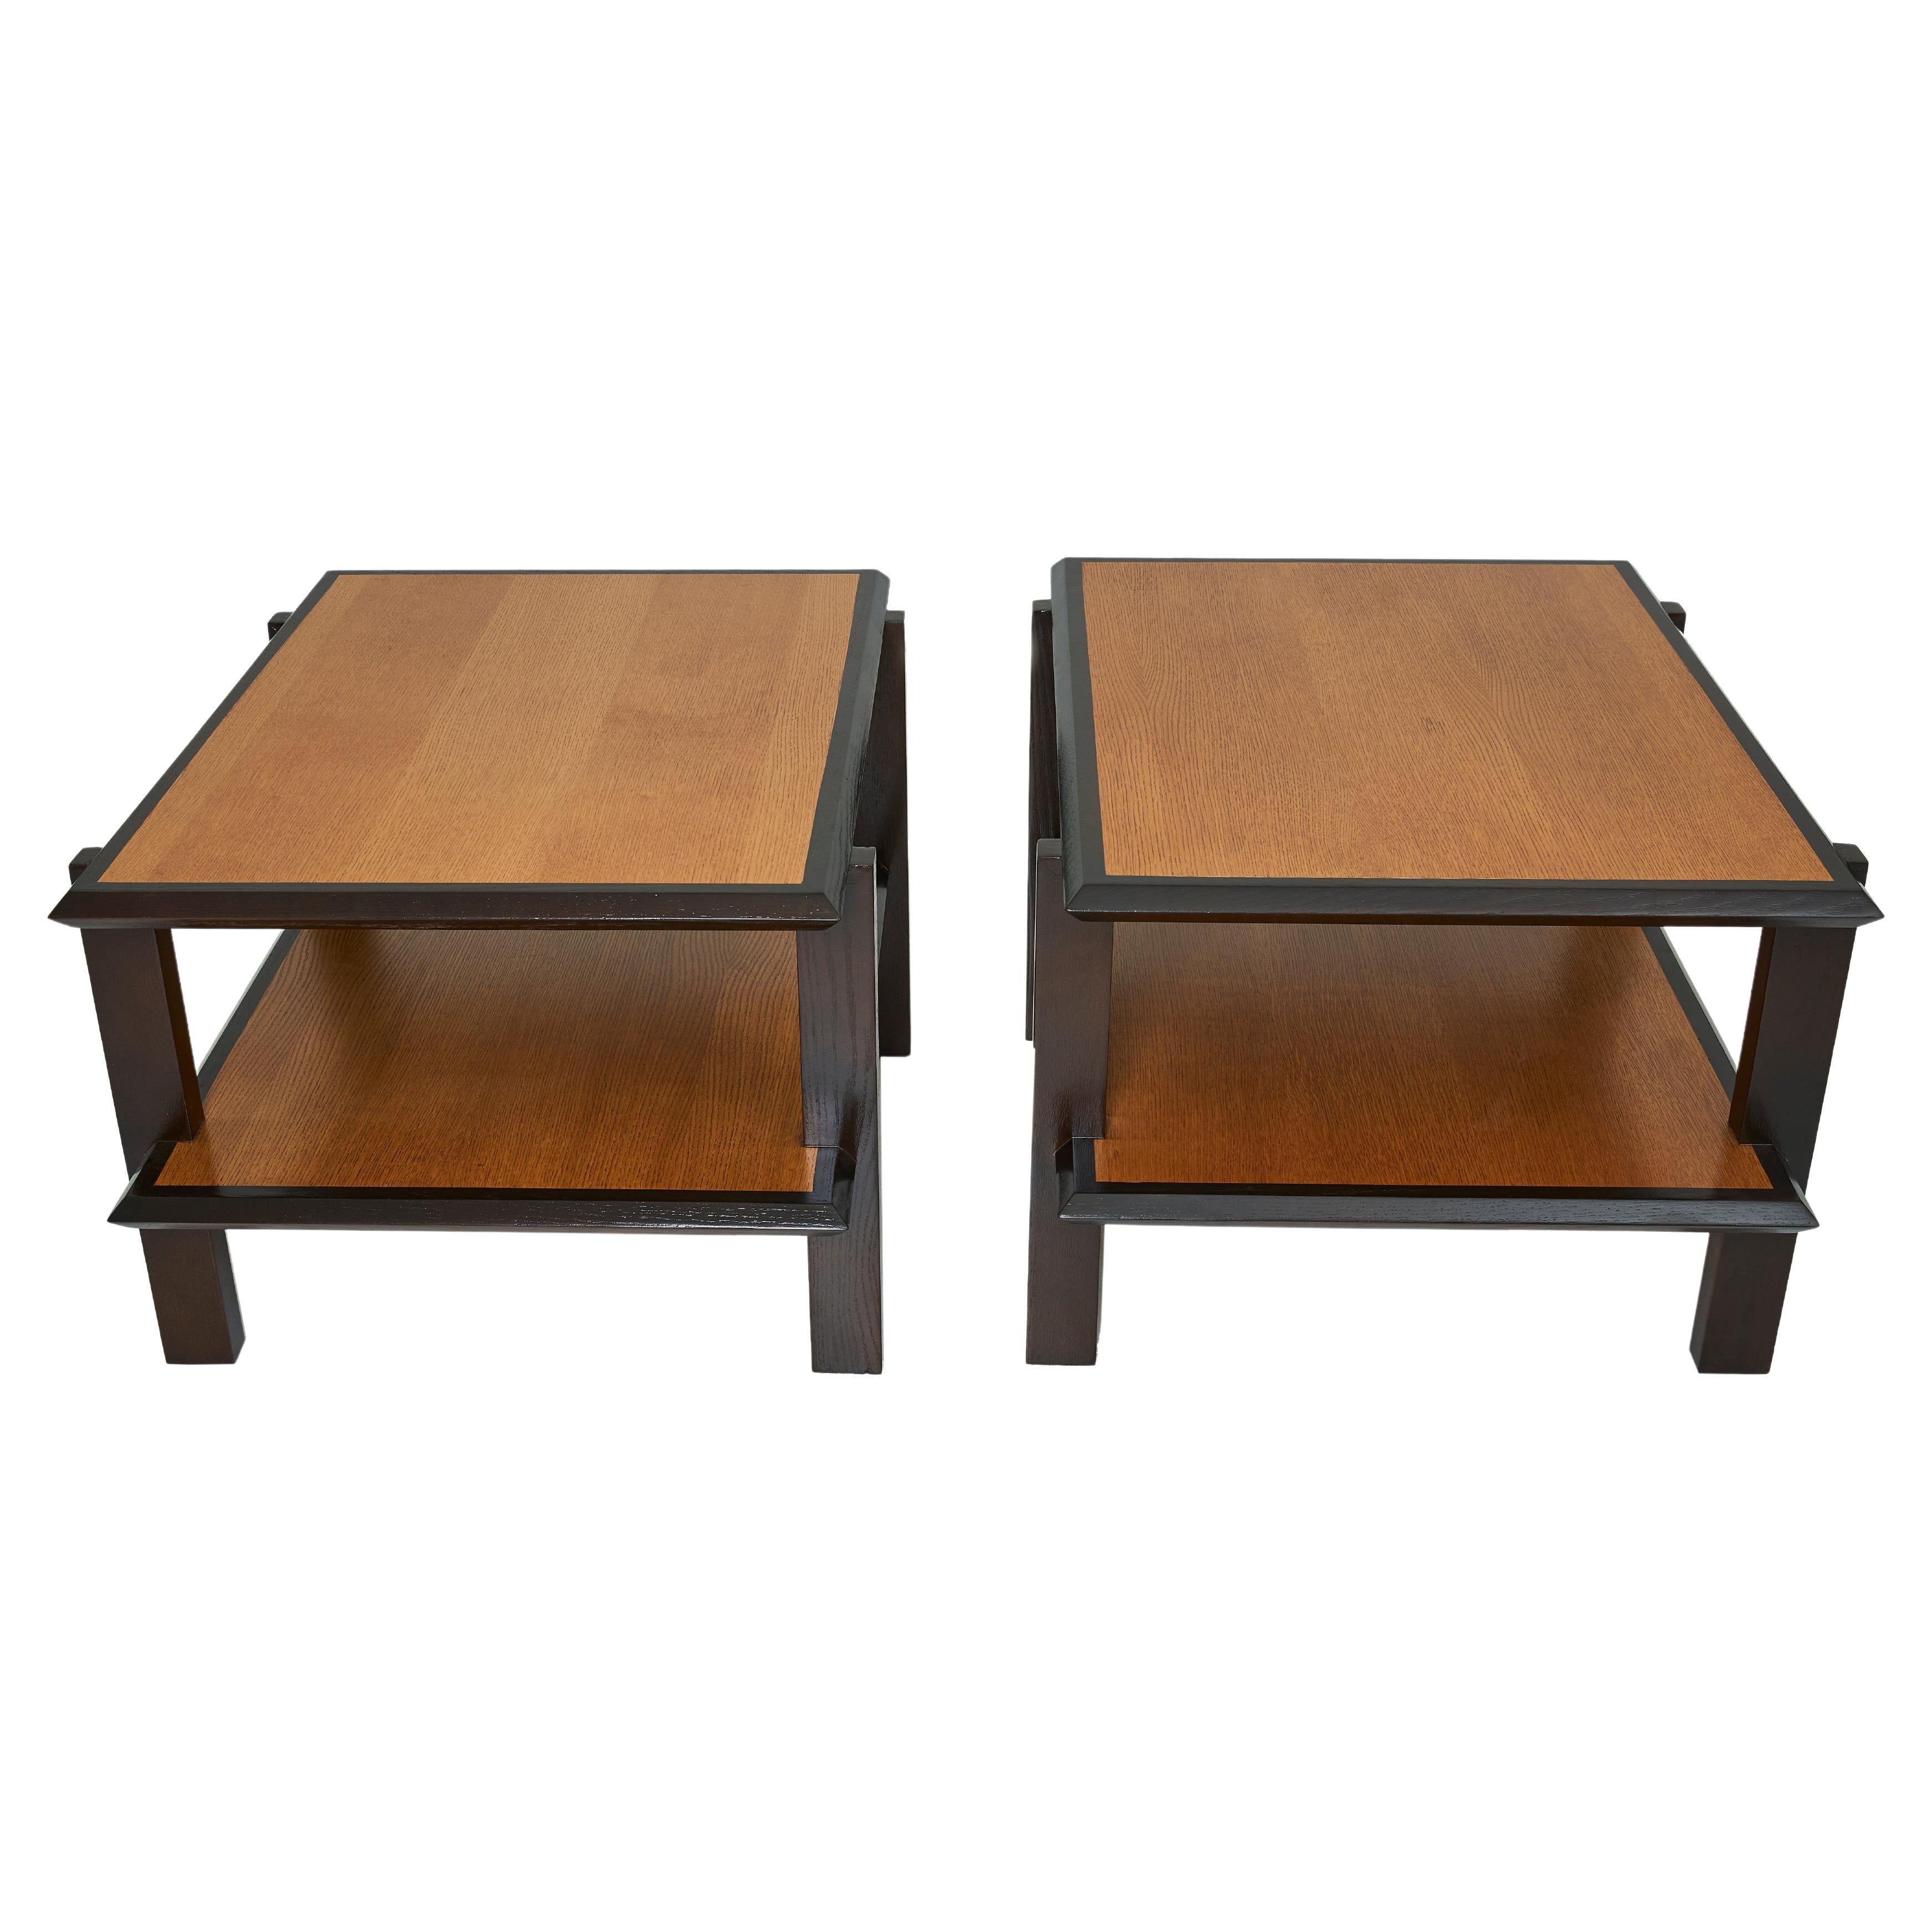 A Pair of 2-Tiered Side Tables Designed by William Haines